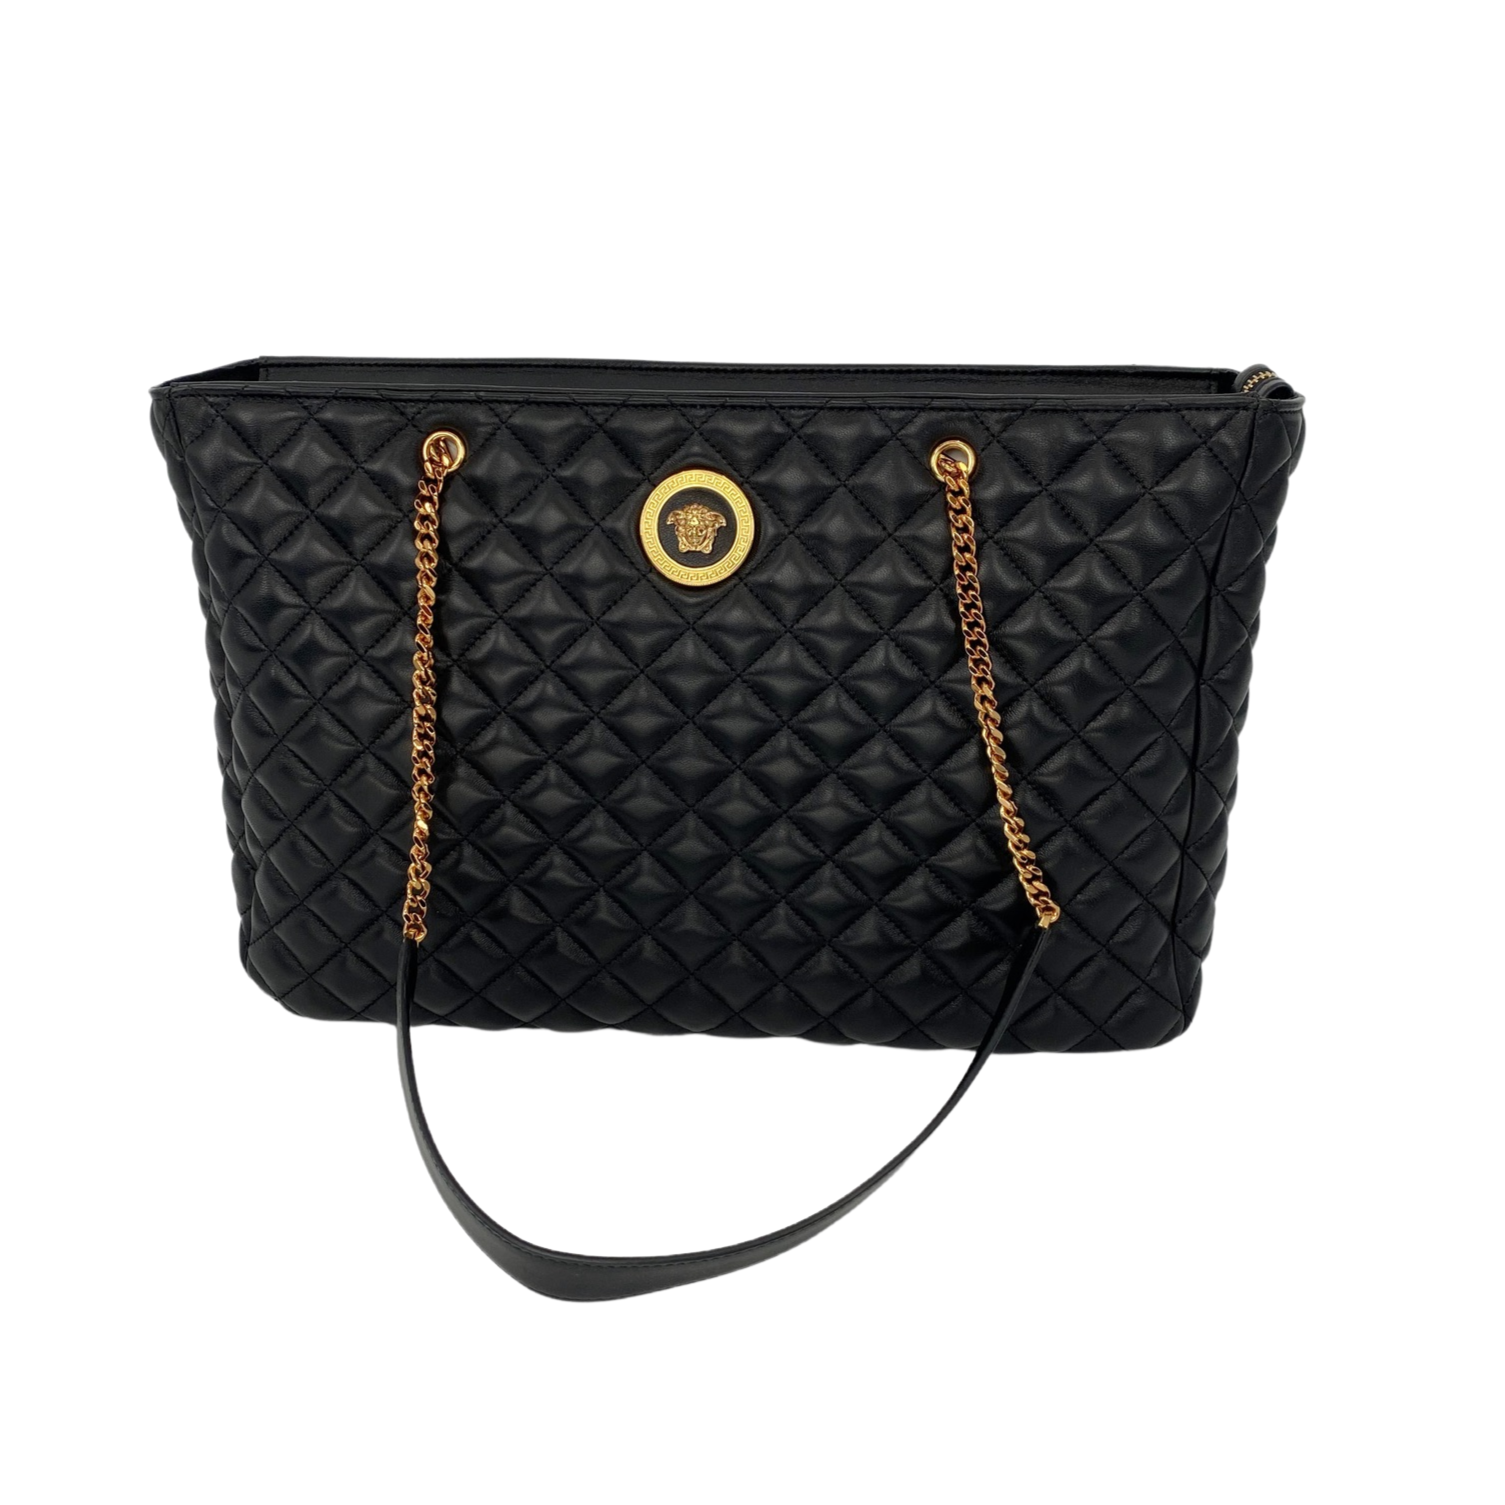 Medusa Leather Coin Purse in Black - Versace